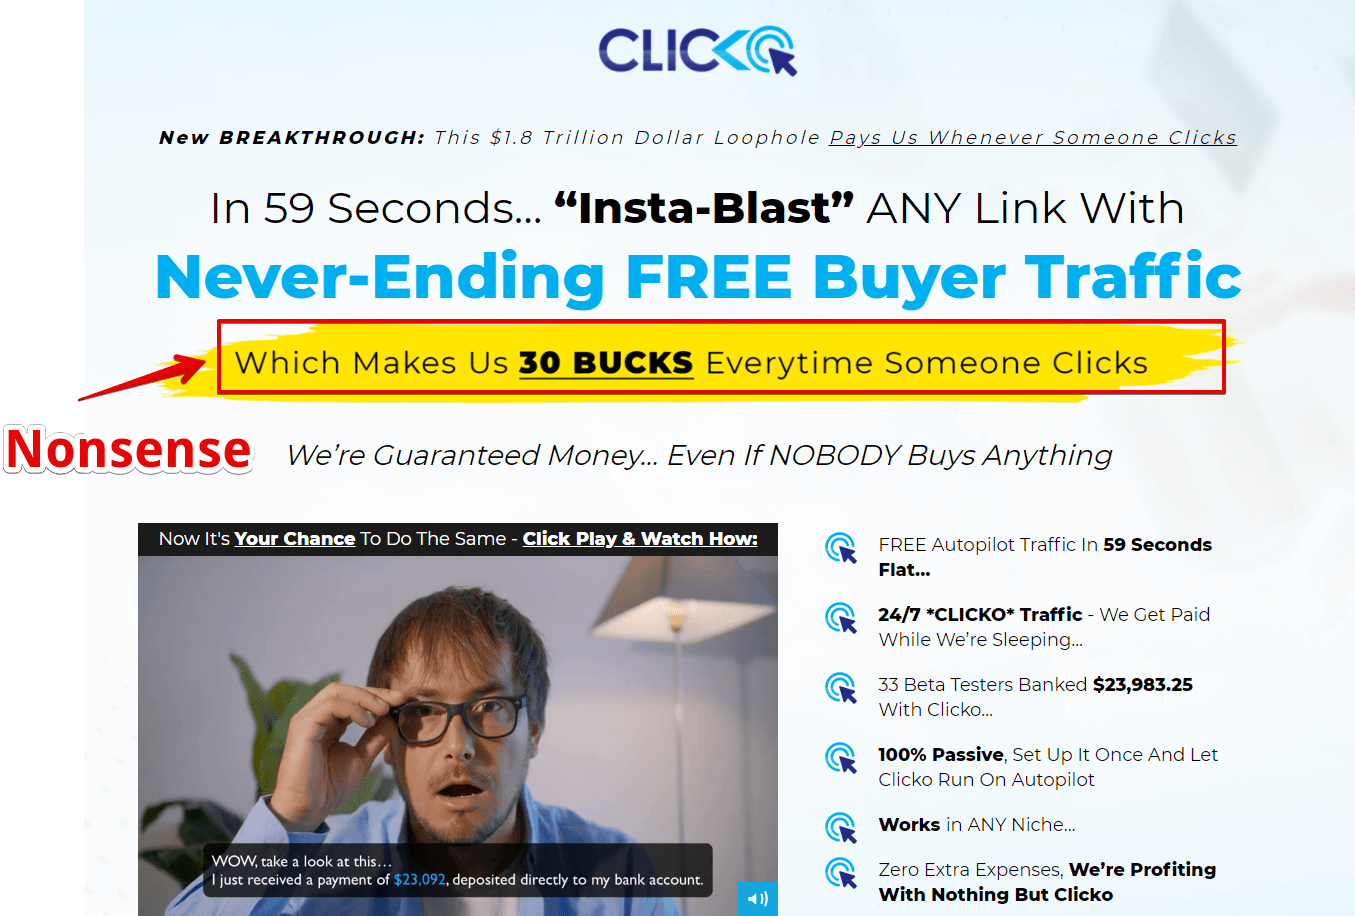 Clicko Review - Landing Page Nonsense